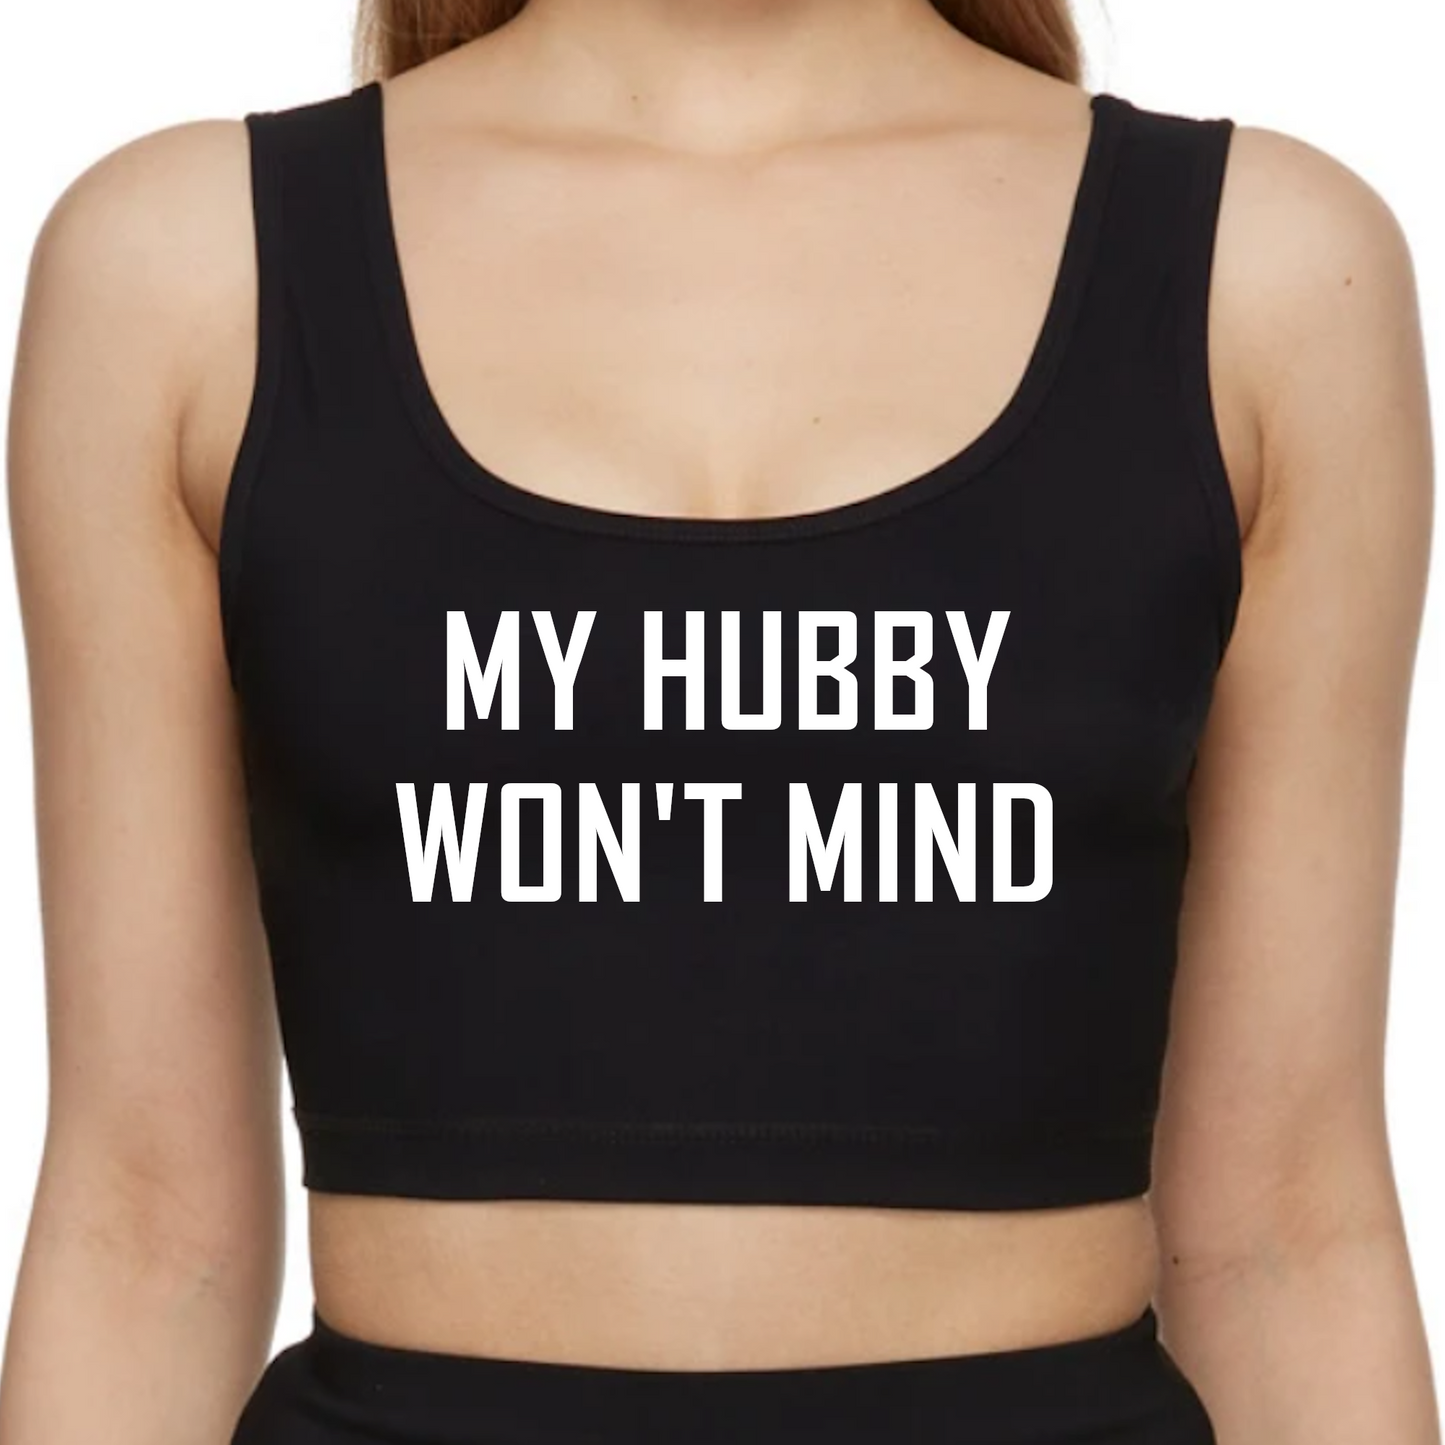 My Hubby Won't Mind Crop Top Hotwife Clothing